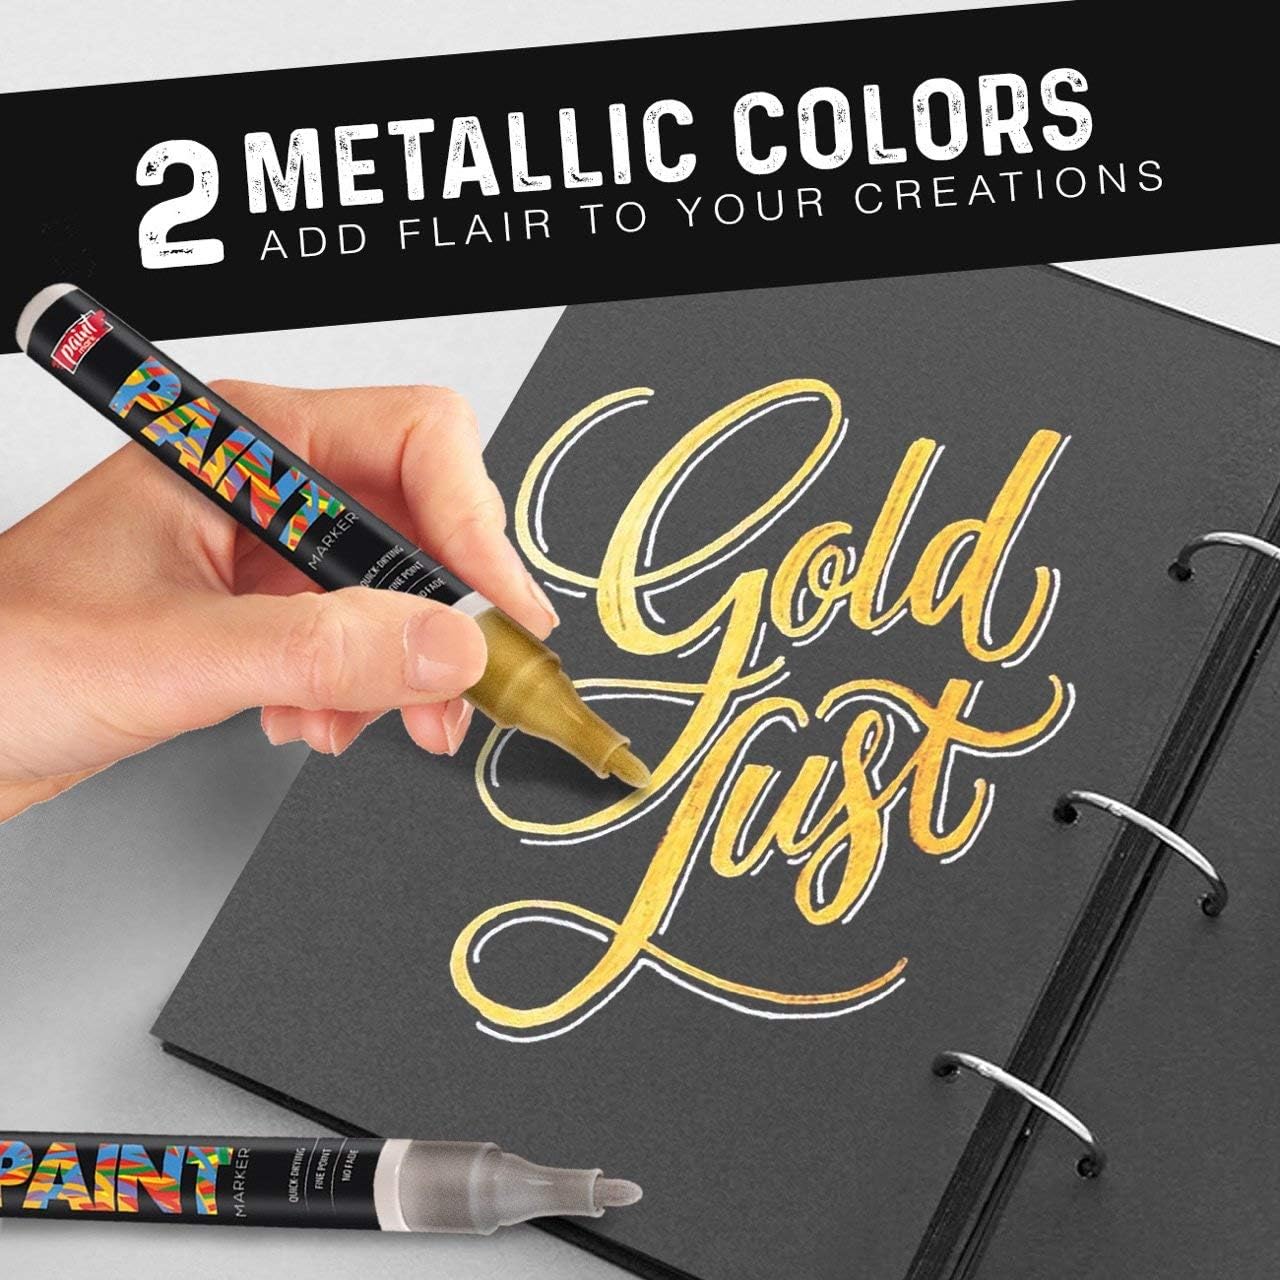 Paint Mark Quick-Dry Paint Pens - Write On Anything!